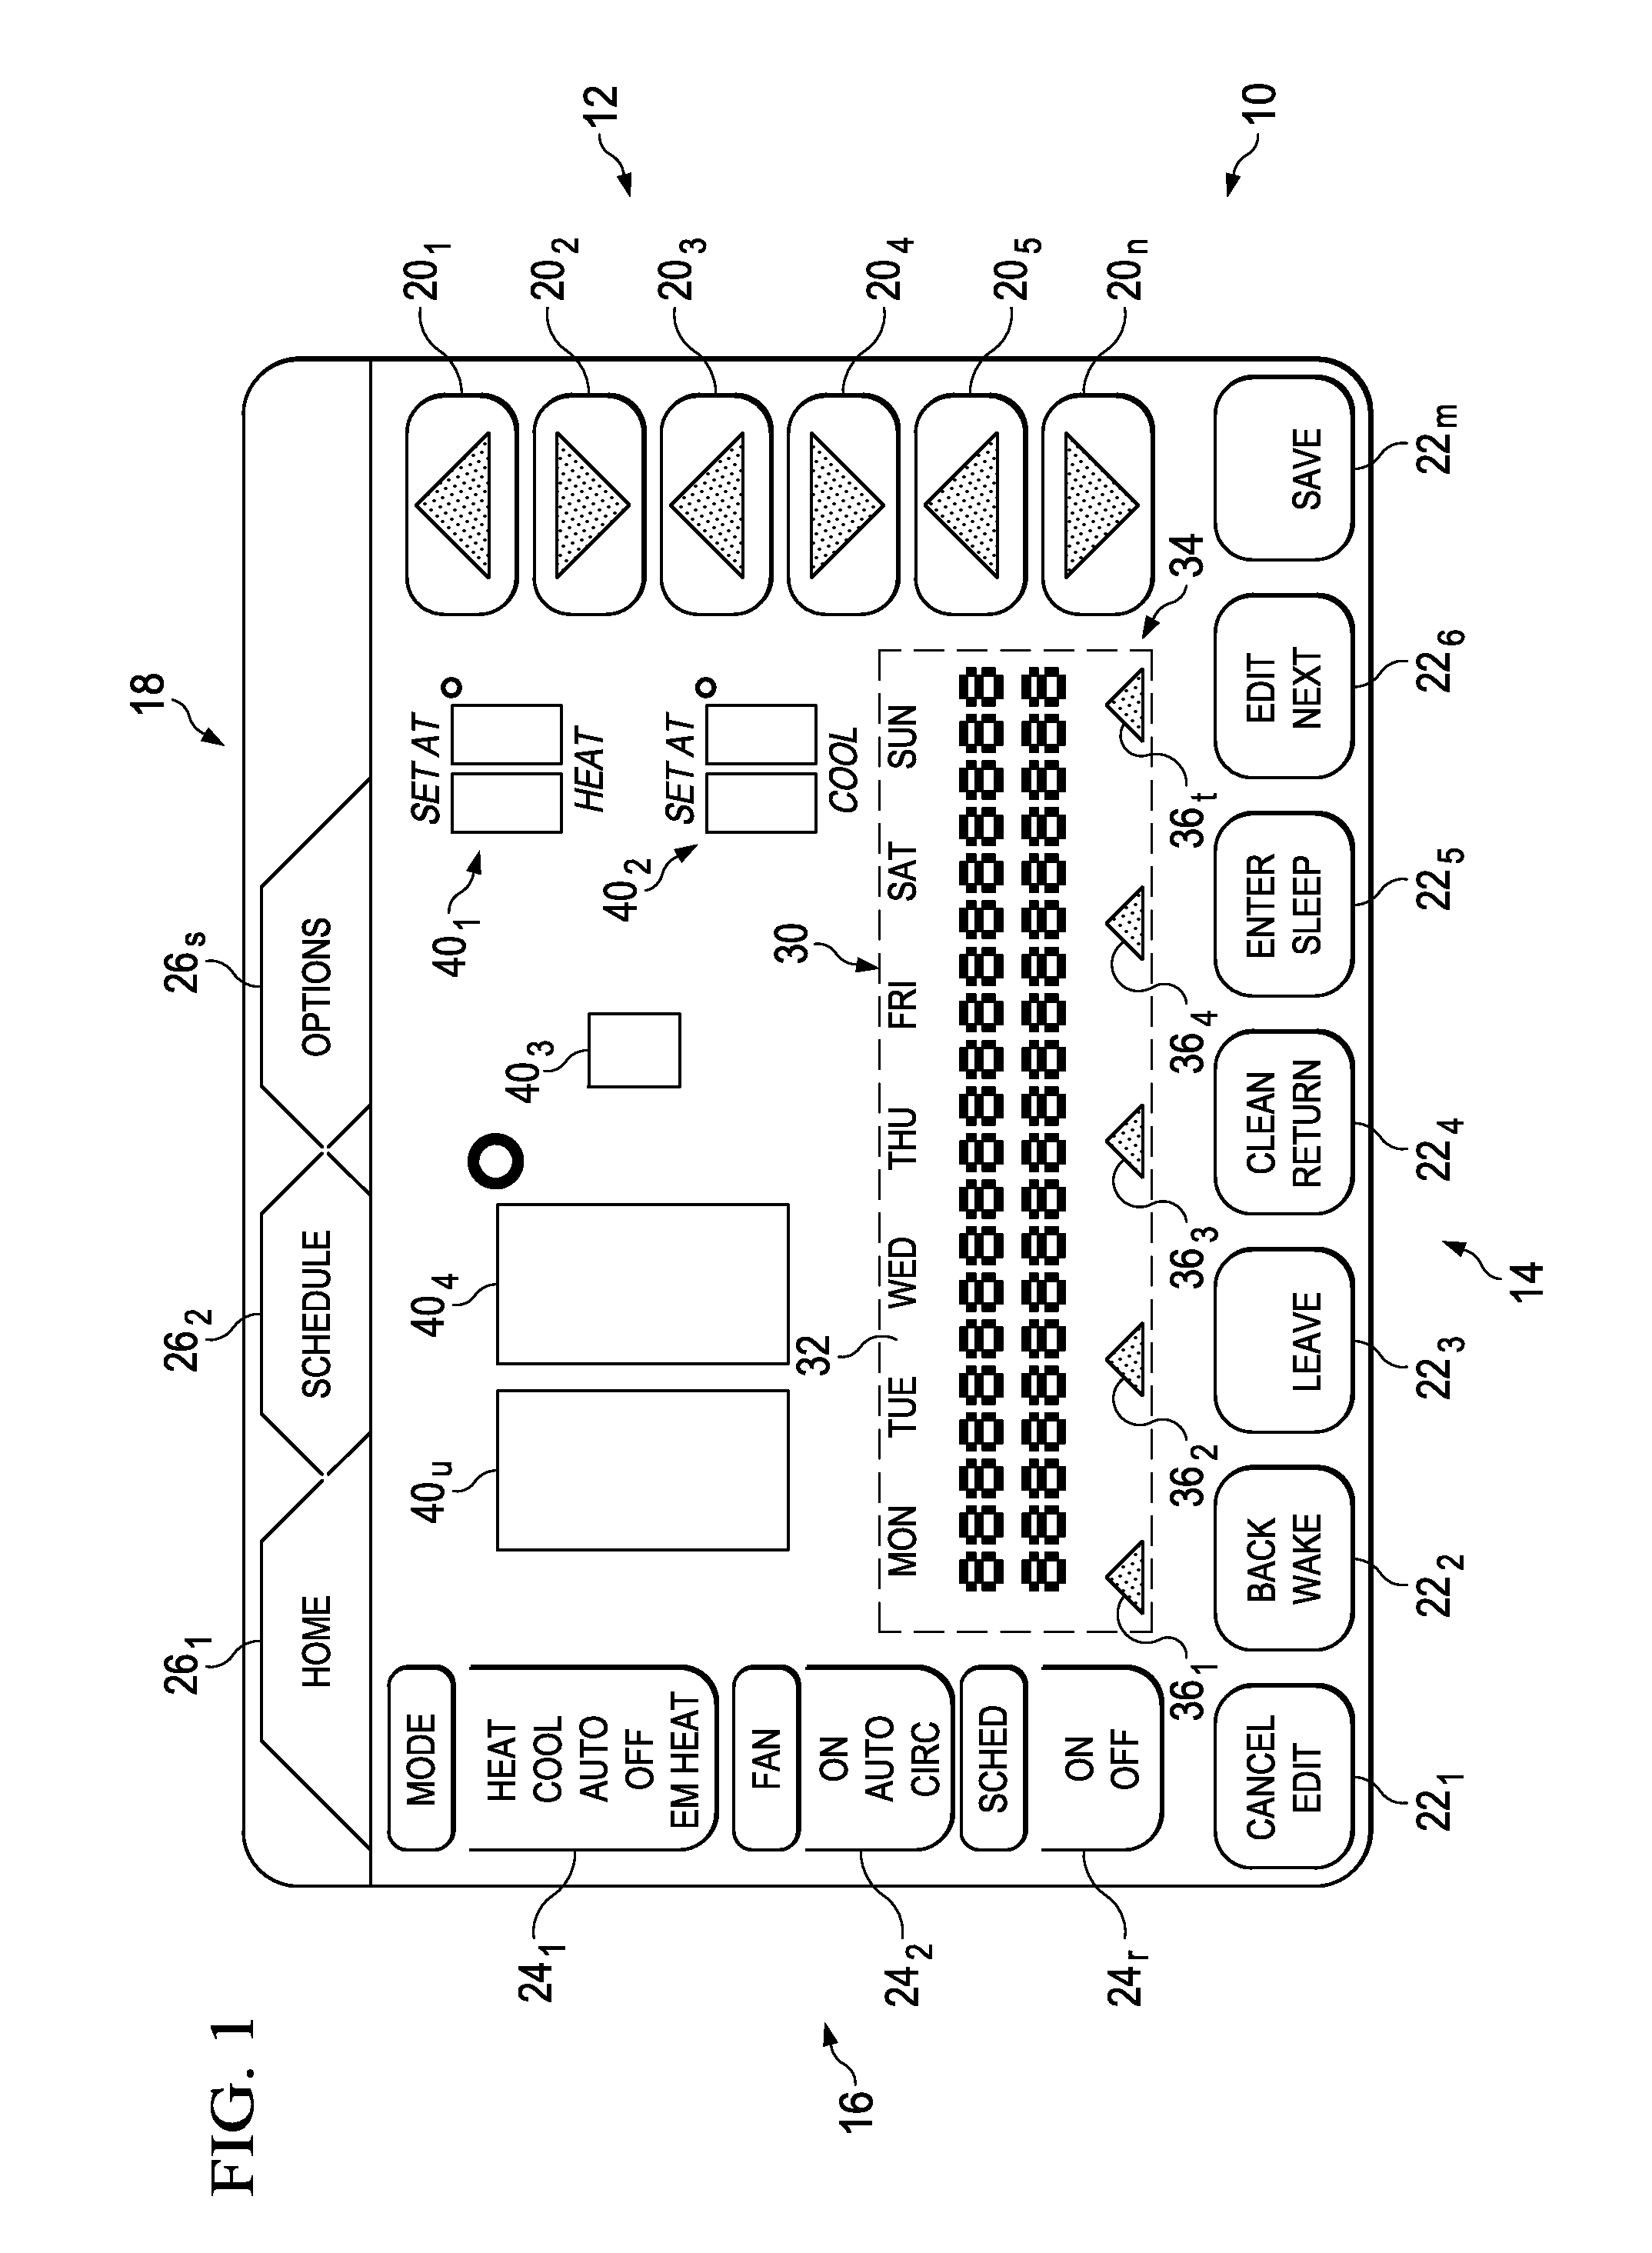 Display apparatus and method having multiple day programming capability for an environmental control system